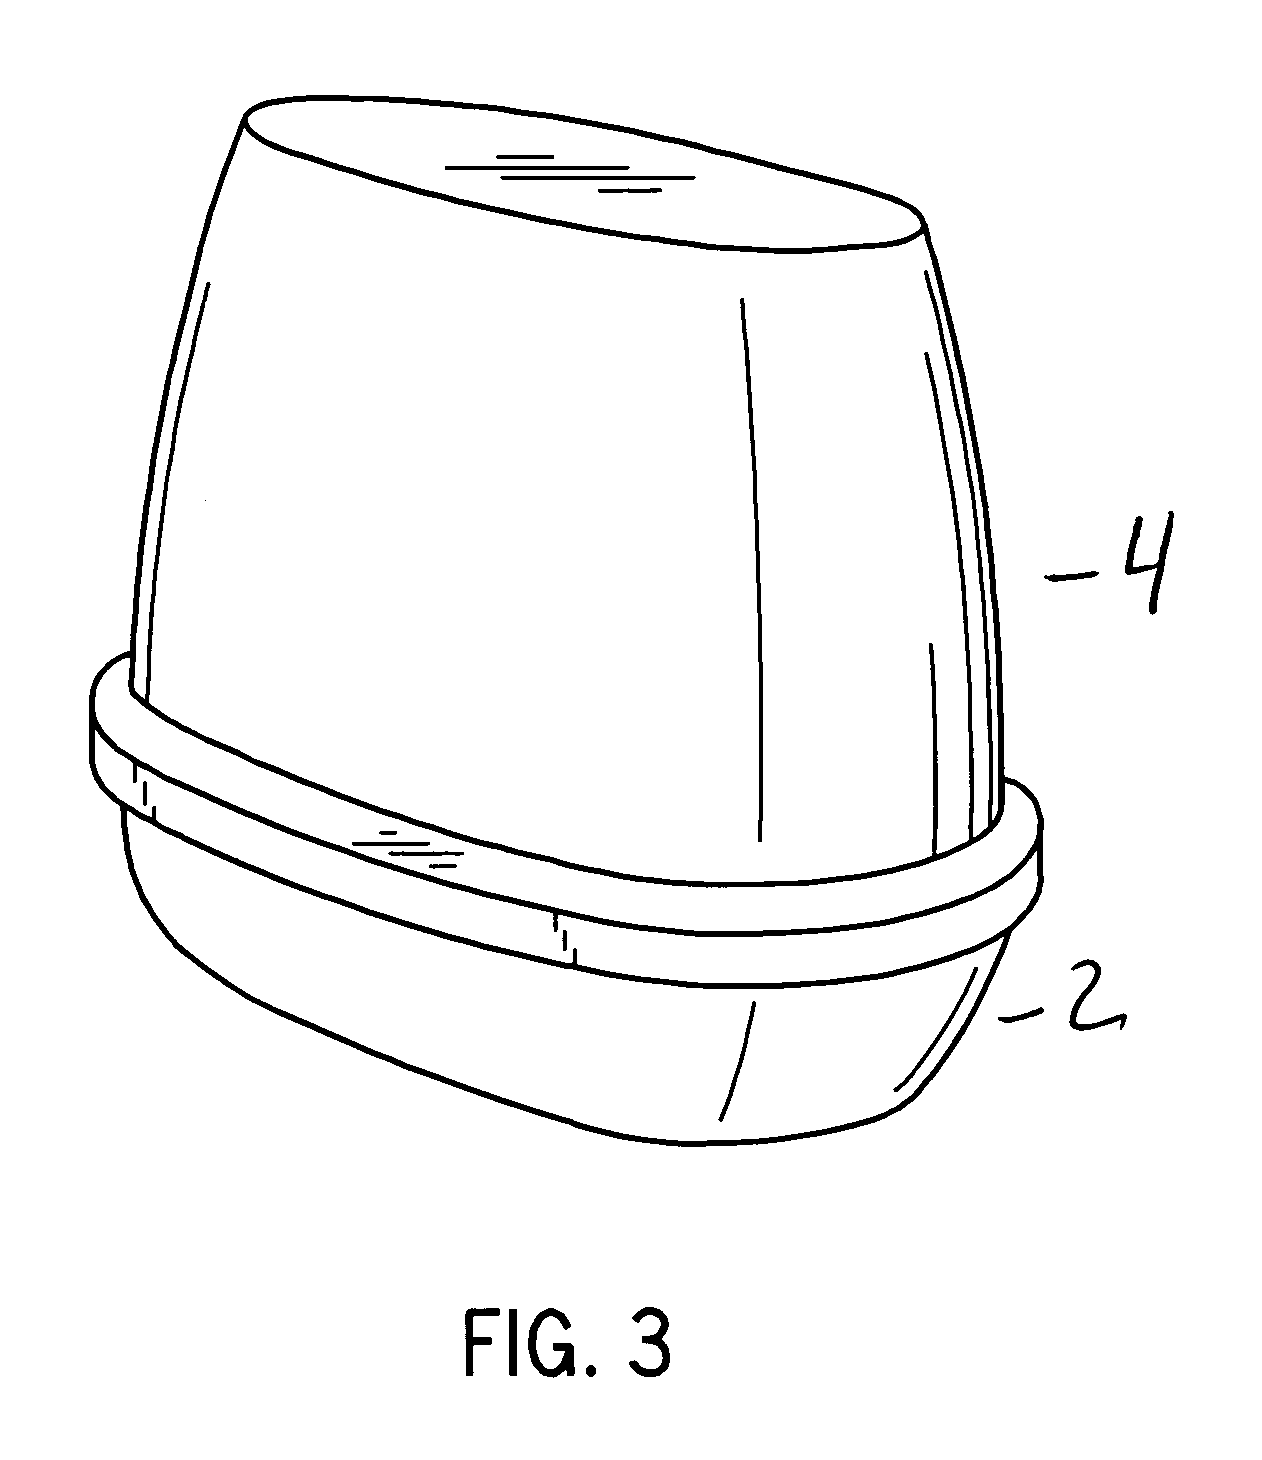 Open gel delivery device